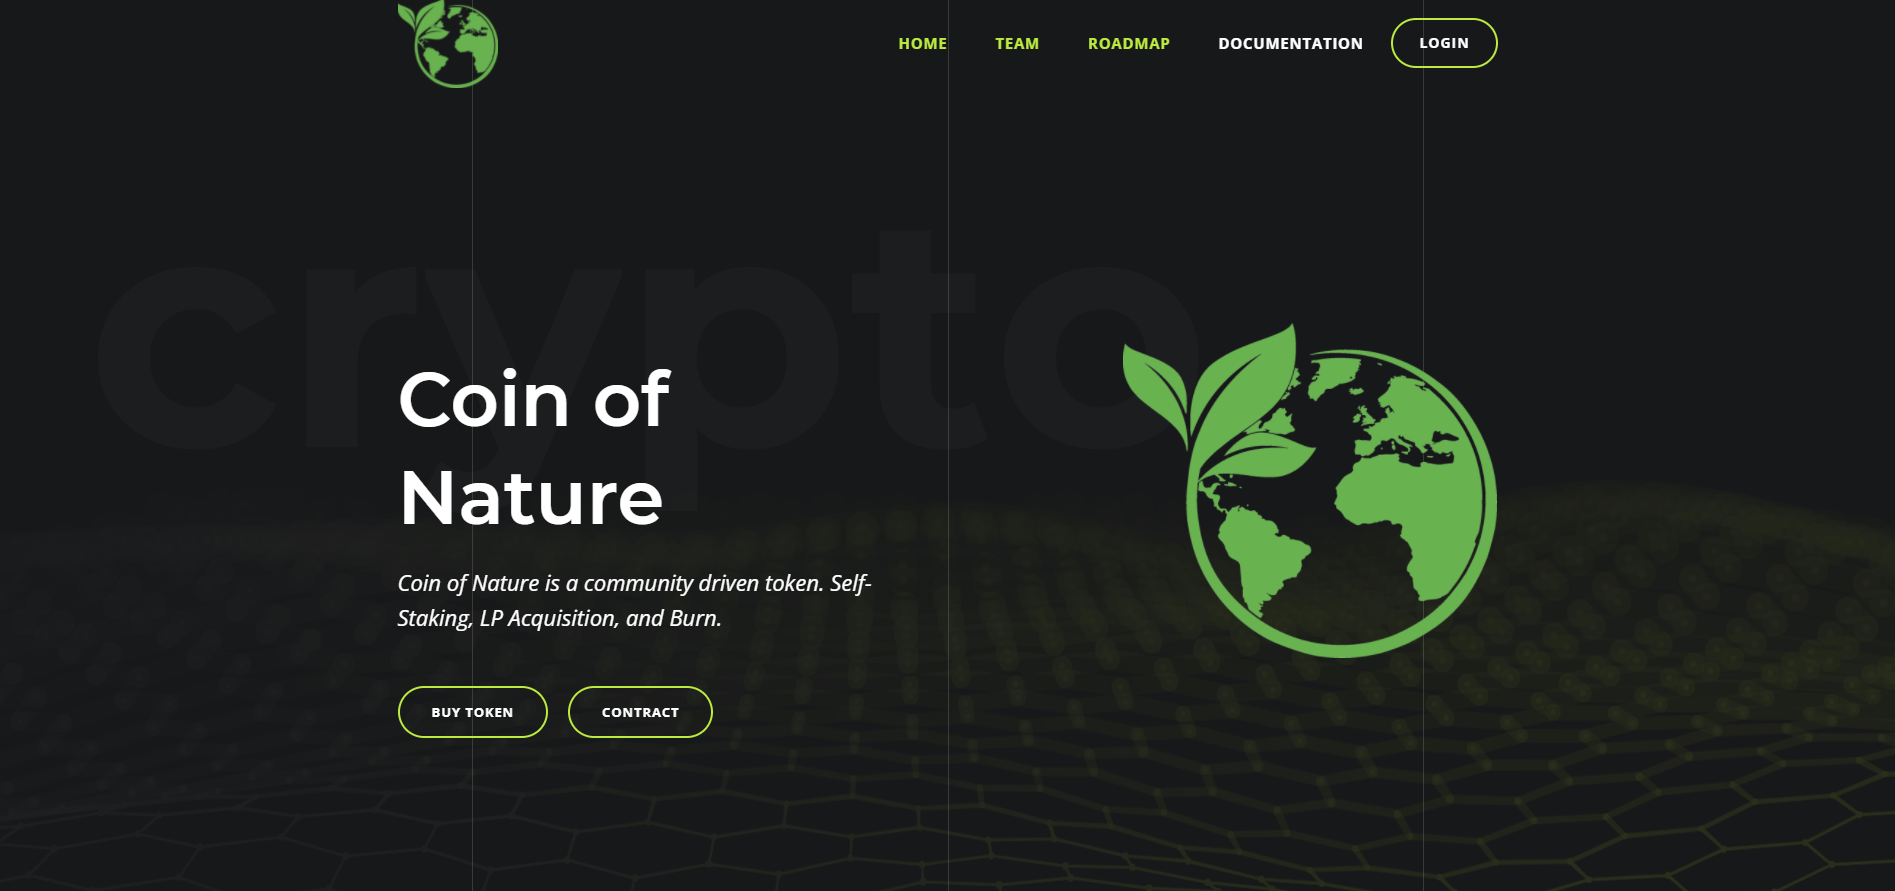 Coin of Nature - website